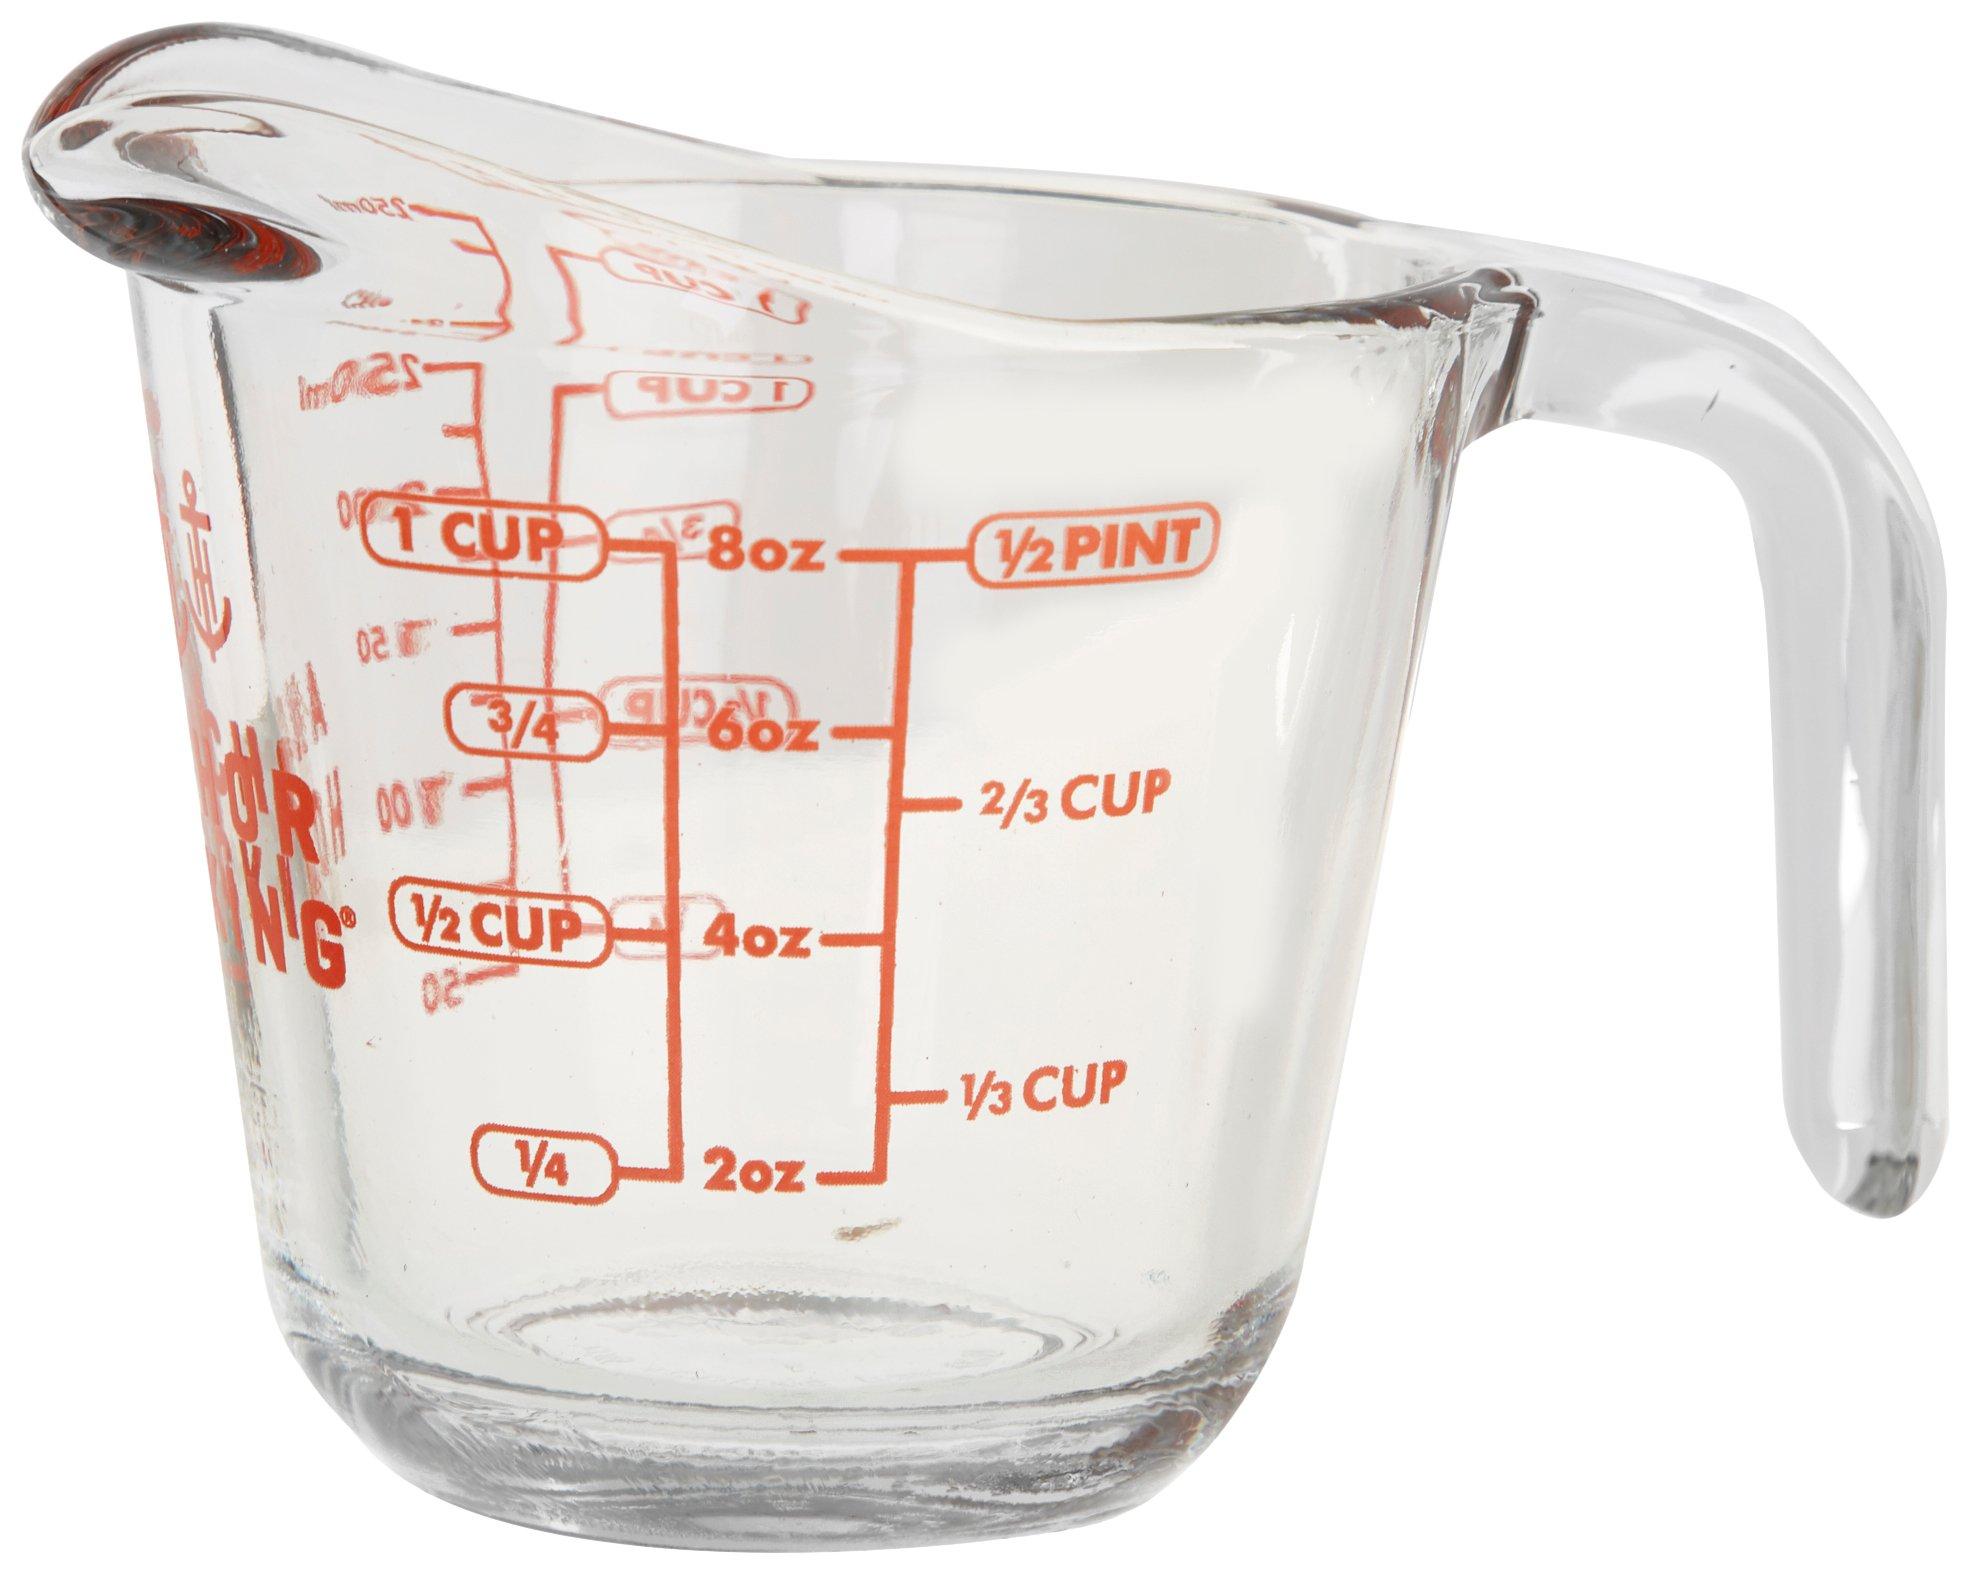 Anchor Hocking Glass Measuring Cup, 36 Oz.